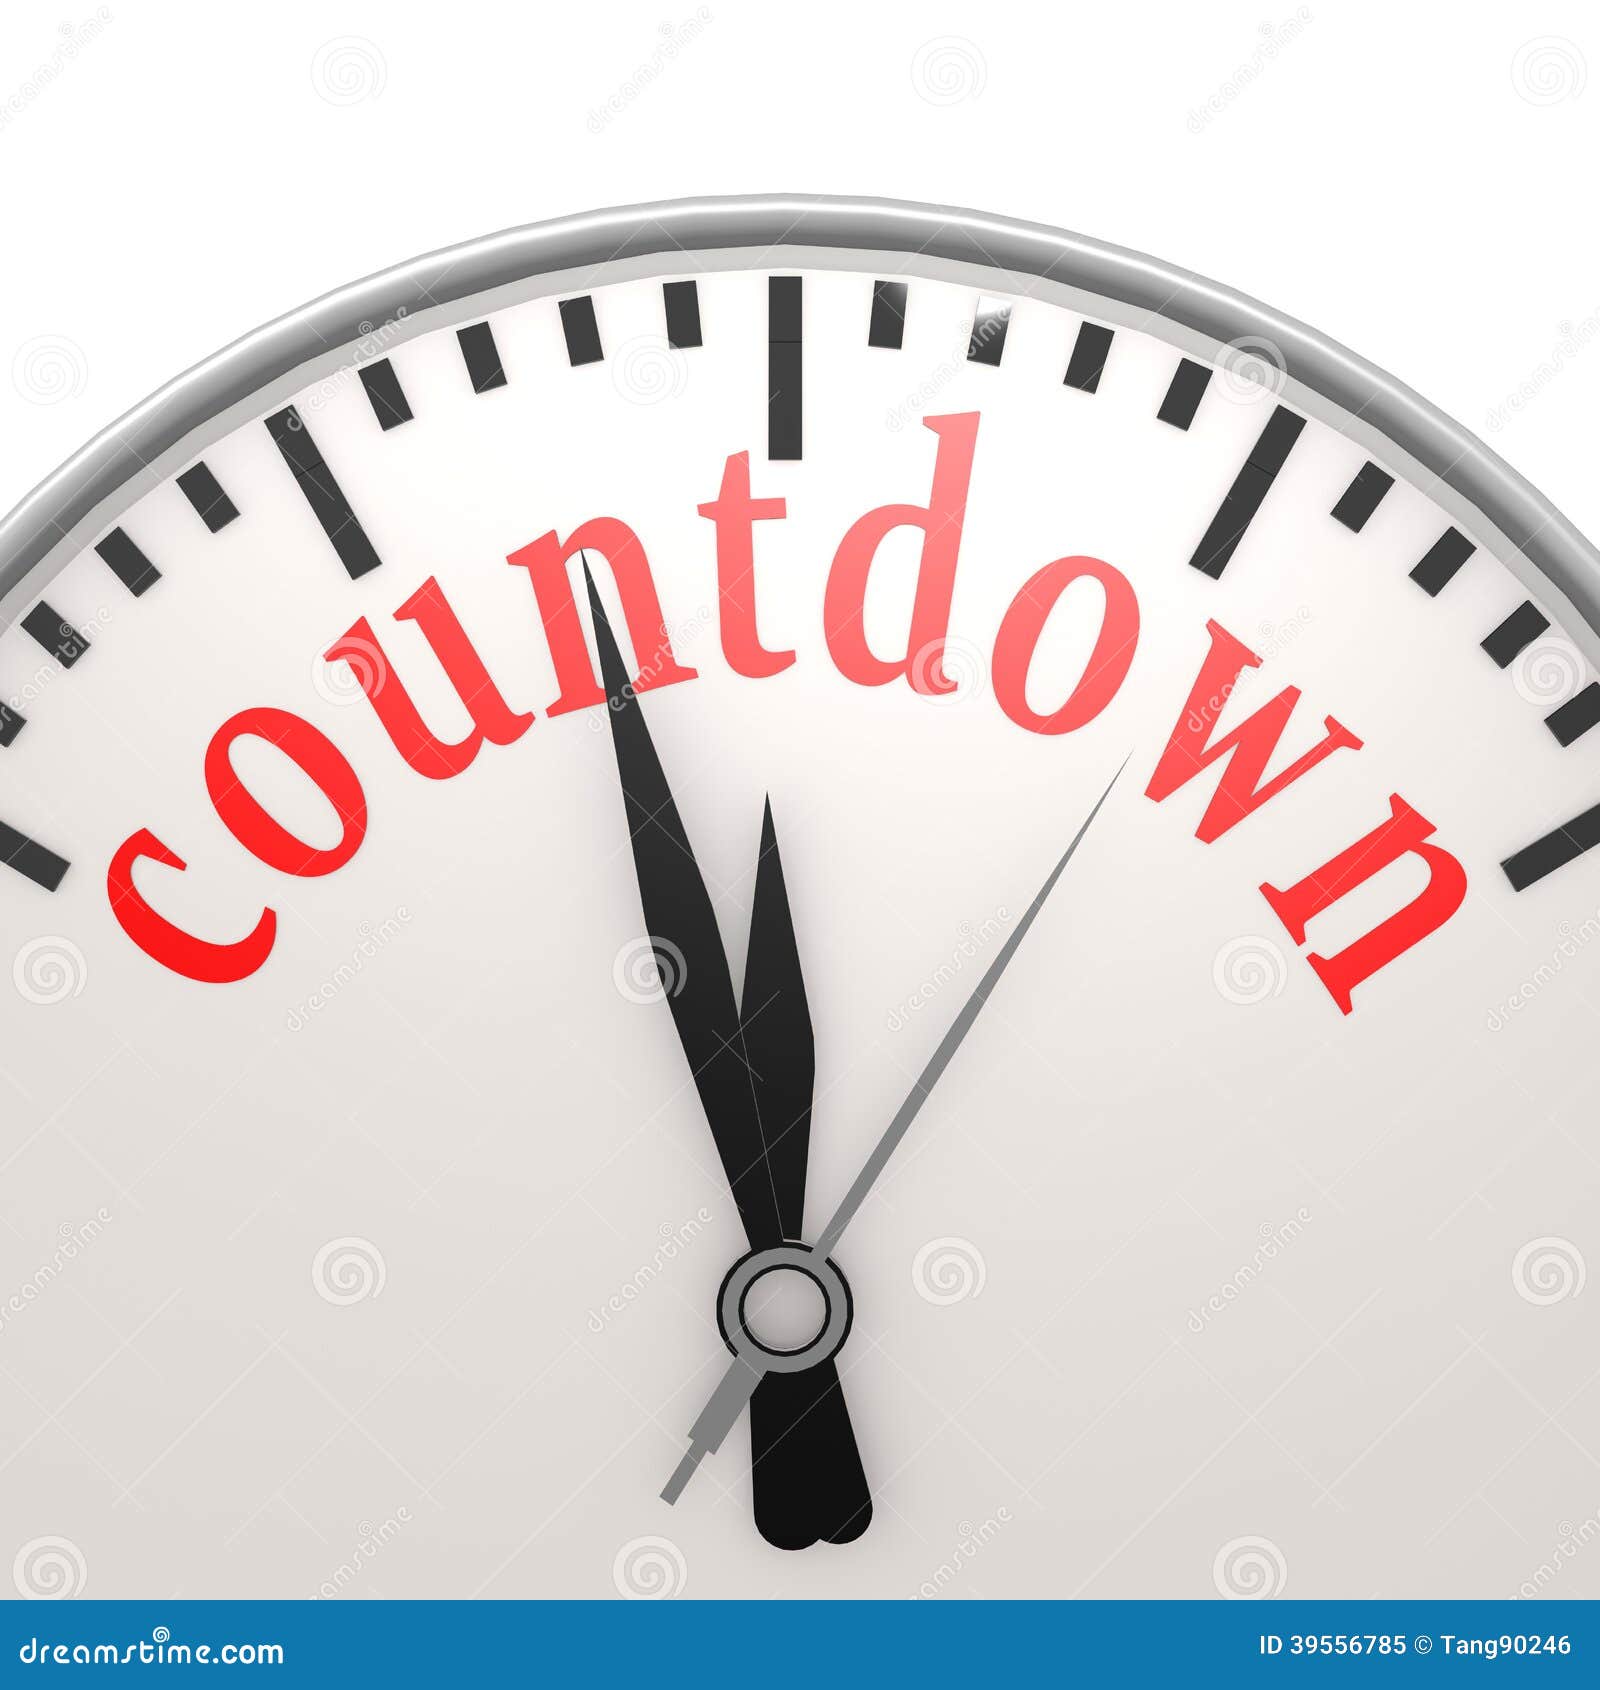 https://thumbs.dreamstime.com/z/countdown-clock-image-hi-res-rendered-artwork-could-be-used-any-graphic-design-39556785.jpg